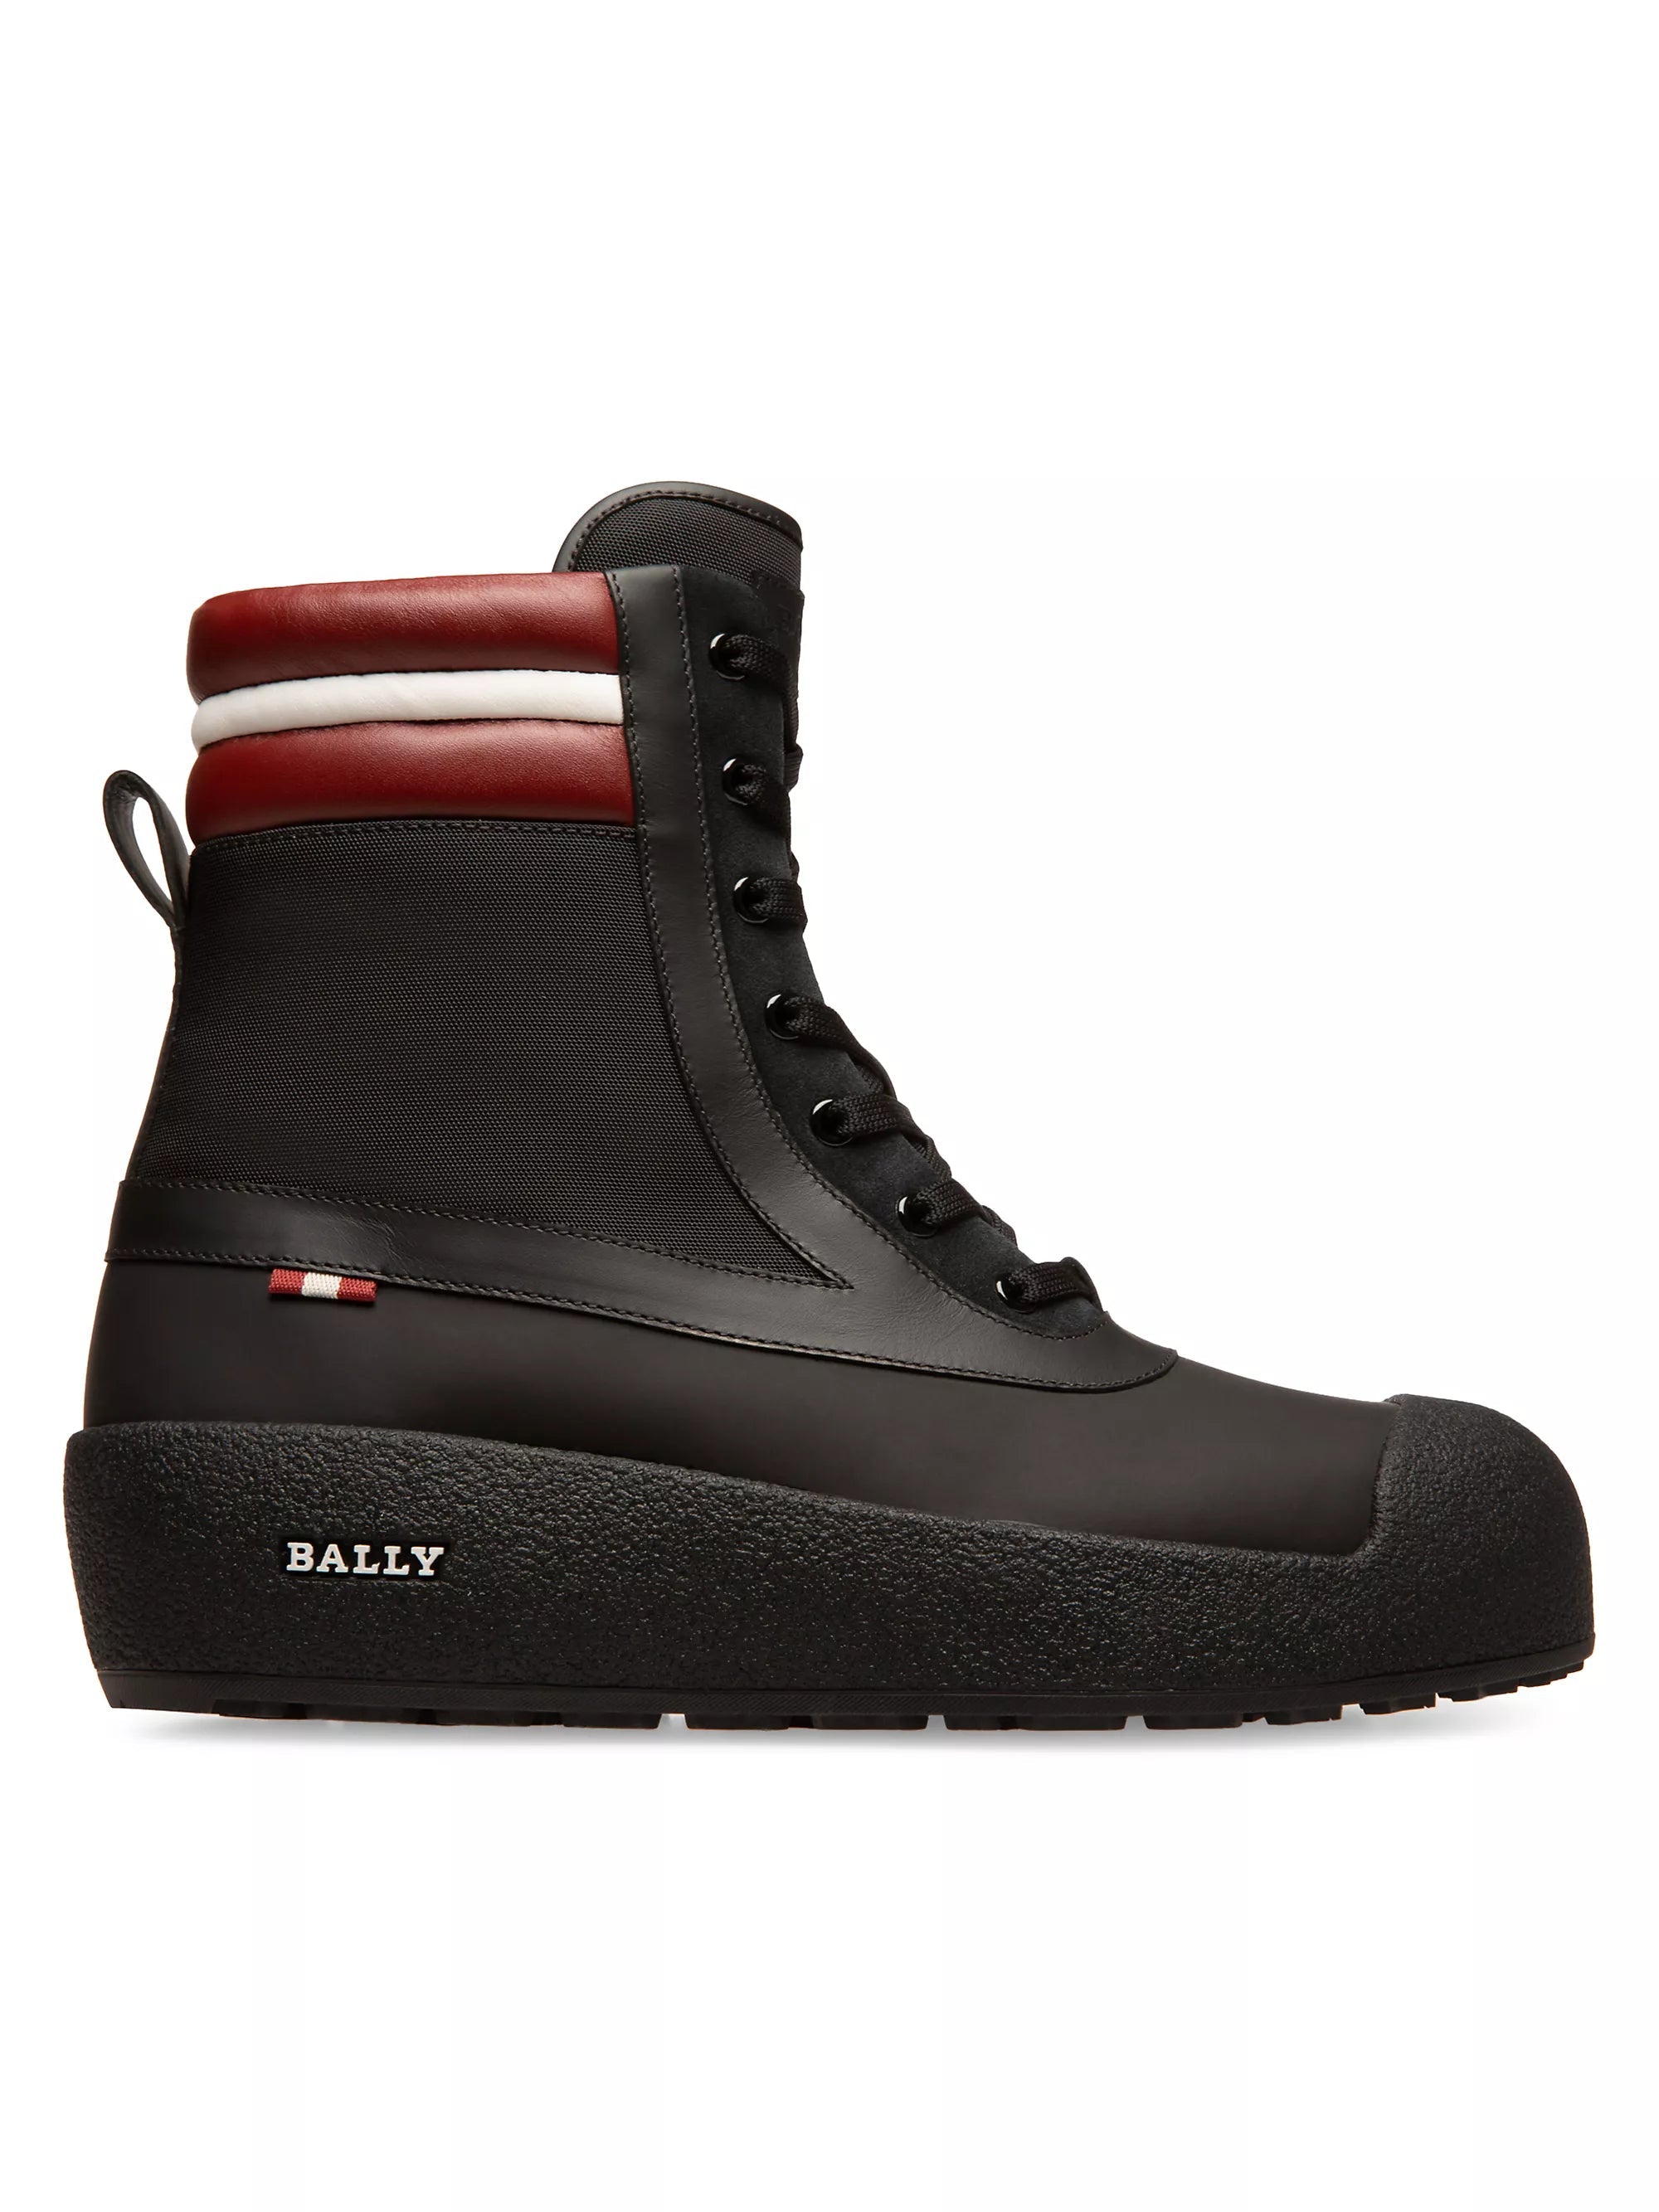 Shop Bally Croker 6239721 Men's Black Calf Leather Shirling-lined Boots